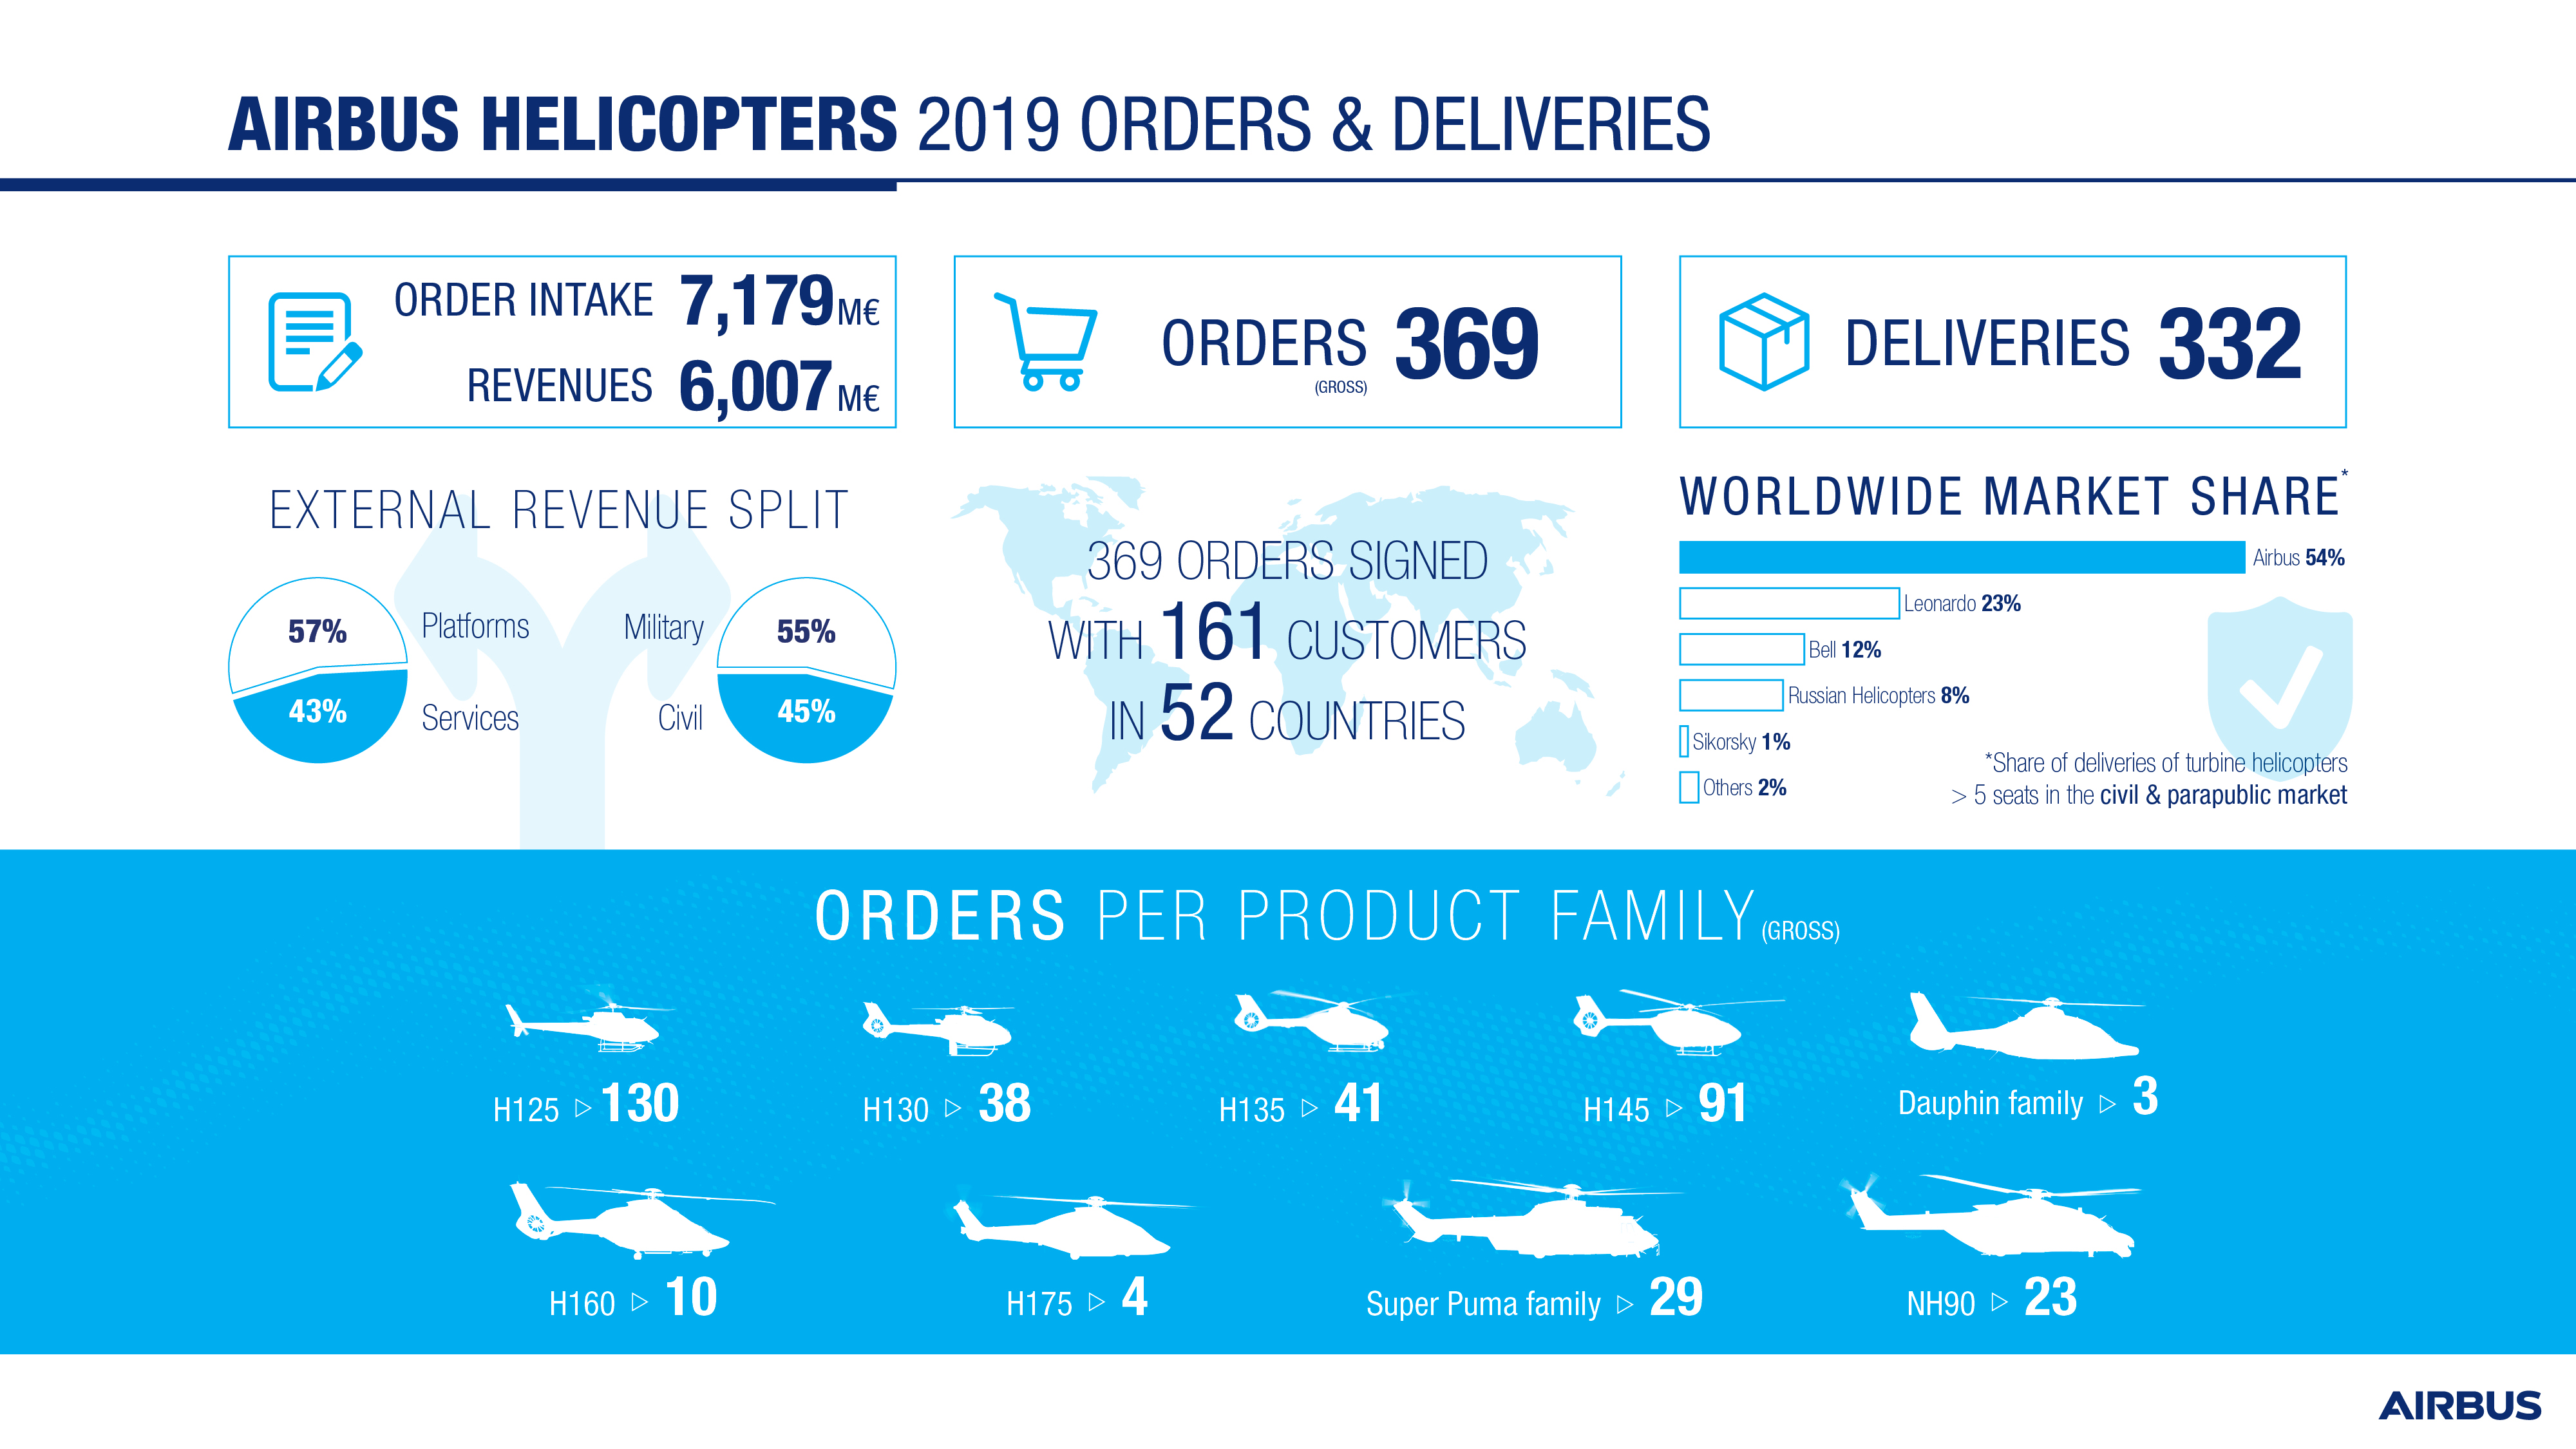 Airbus Helicopters 2019 Orders and Deliveries